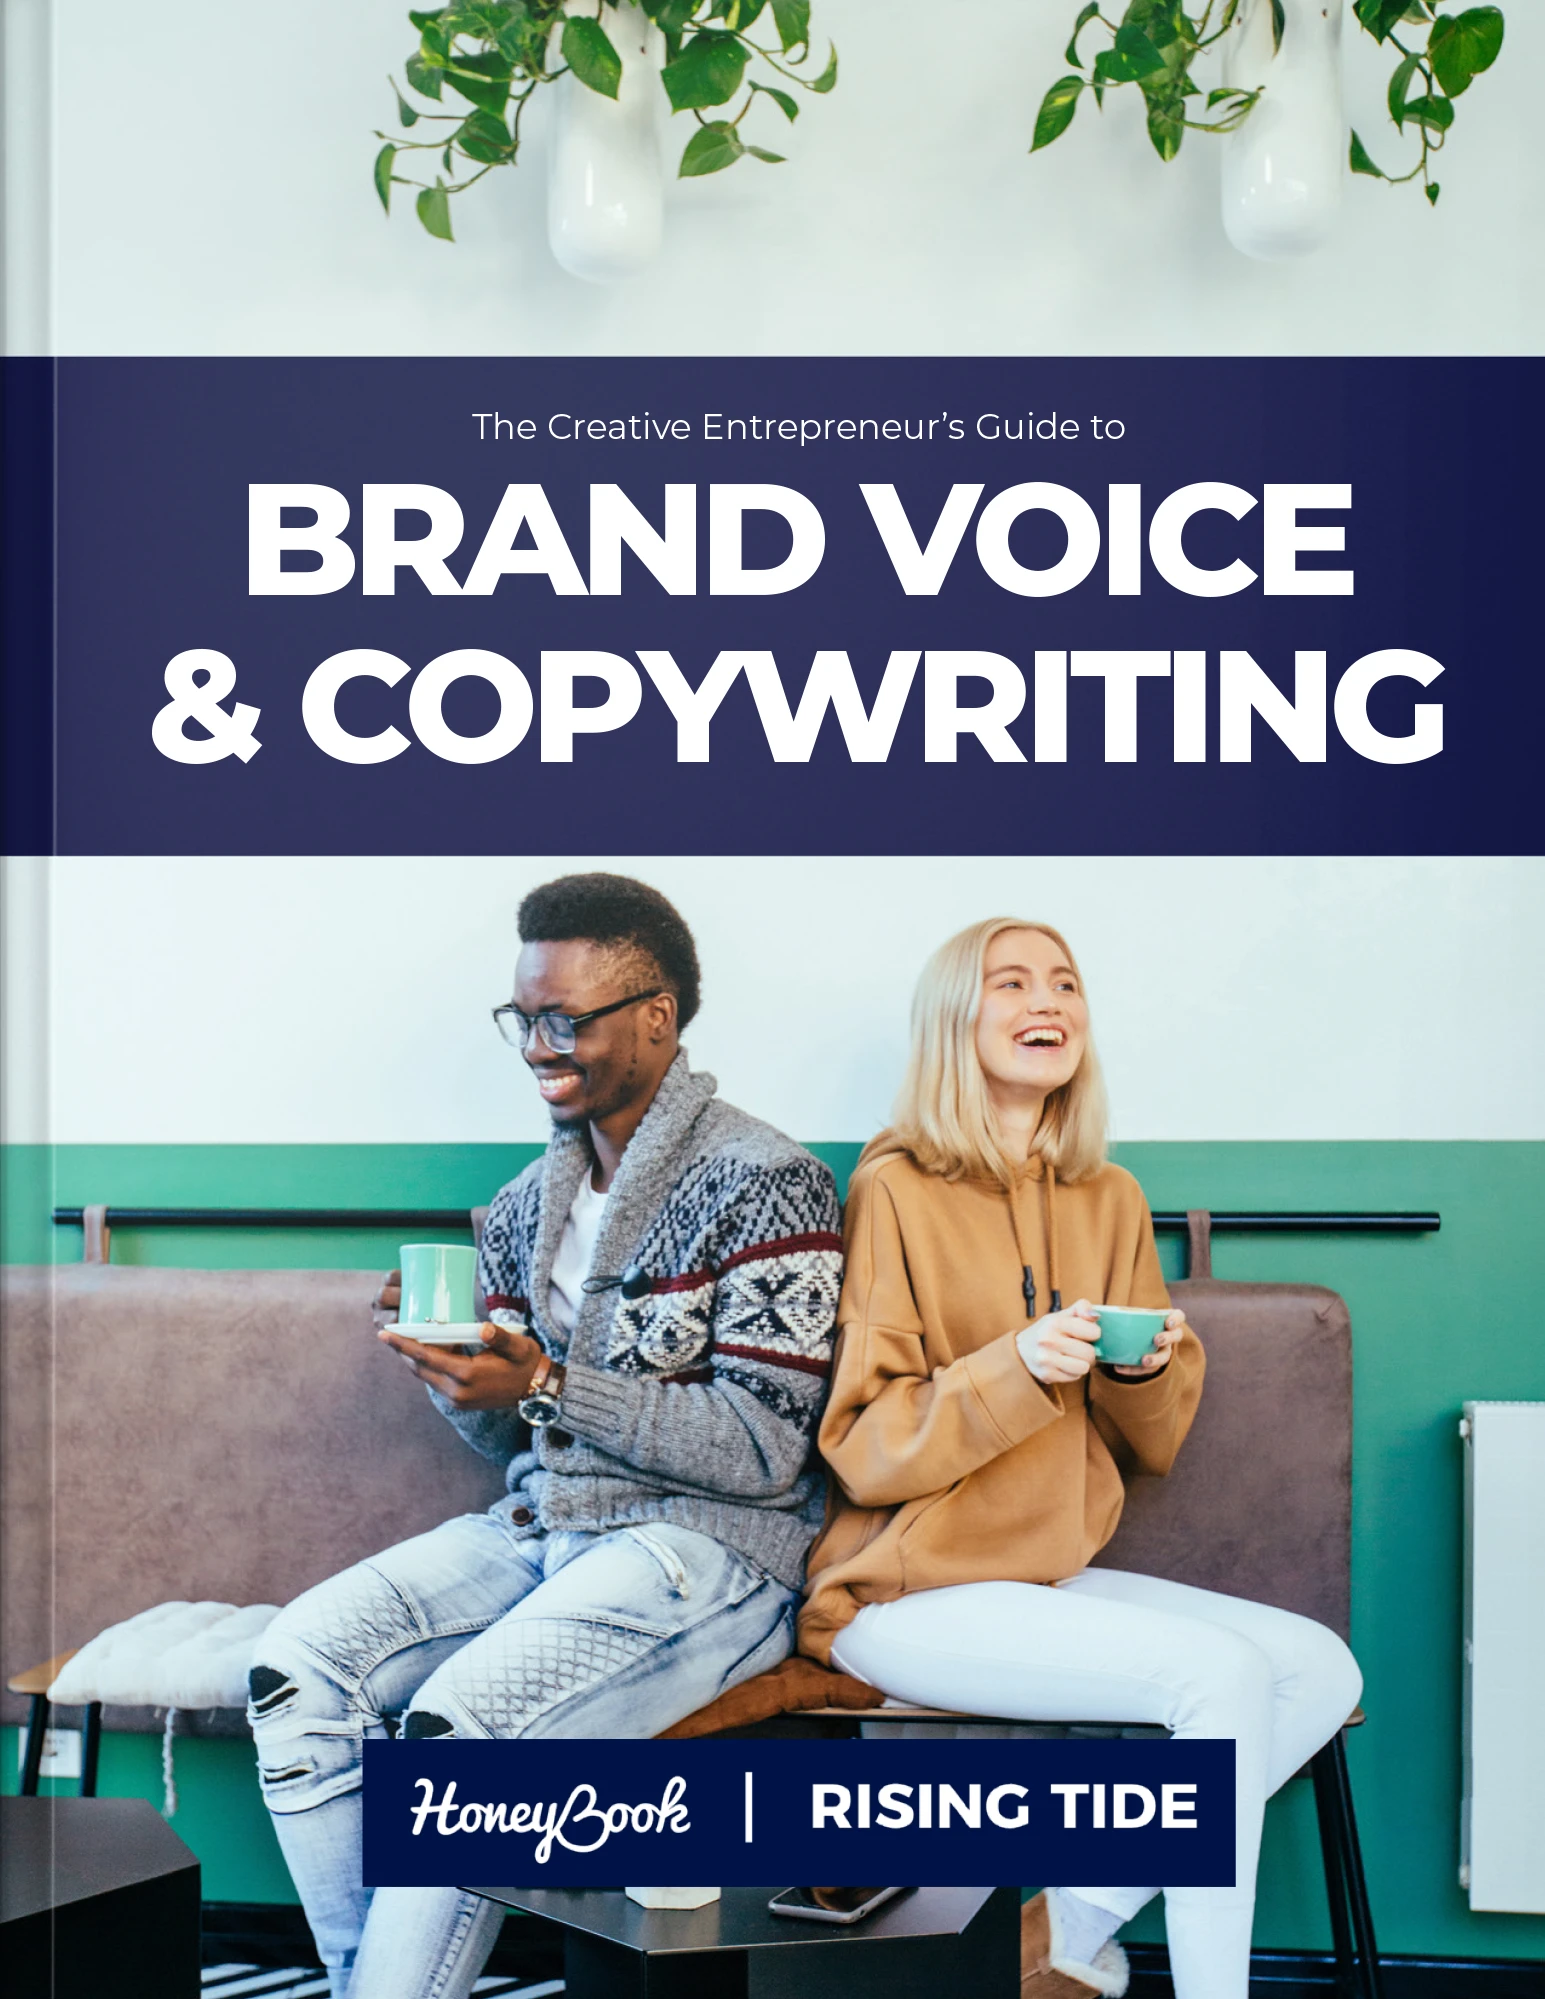 Brand Voice & Copywriting monthly business guide cover photo